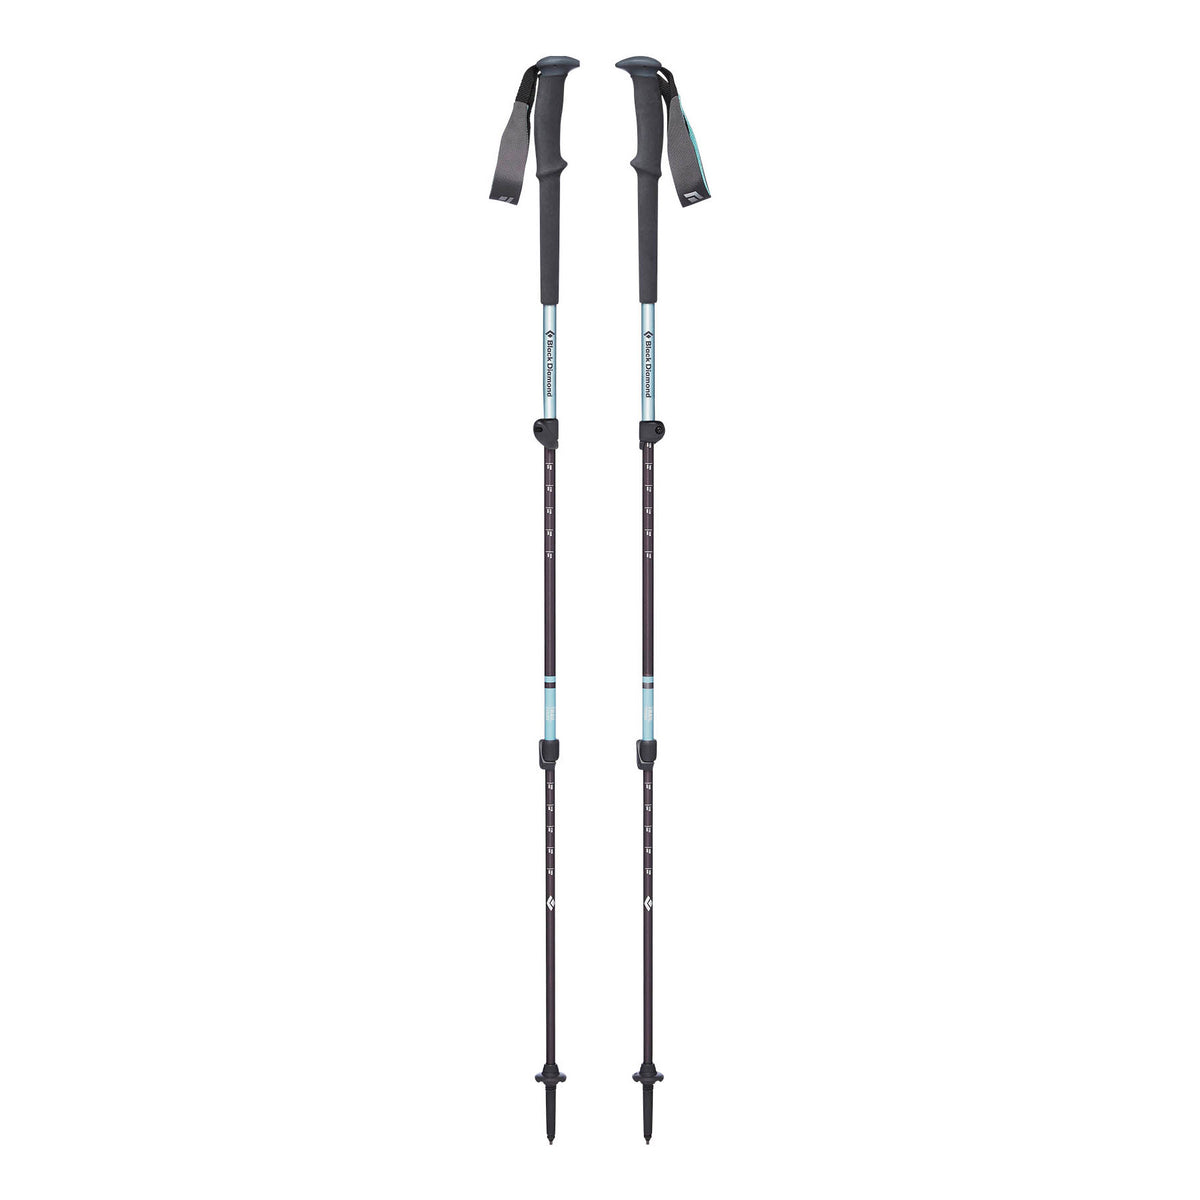 Pair of Black Diamond Trail Women&#39;s trekking poles, shown extended and stood up in Light Blue